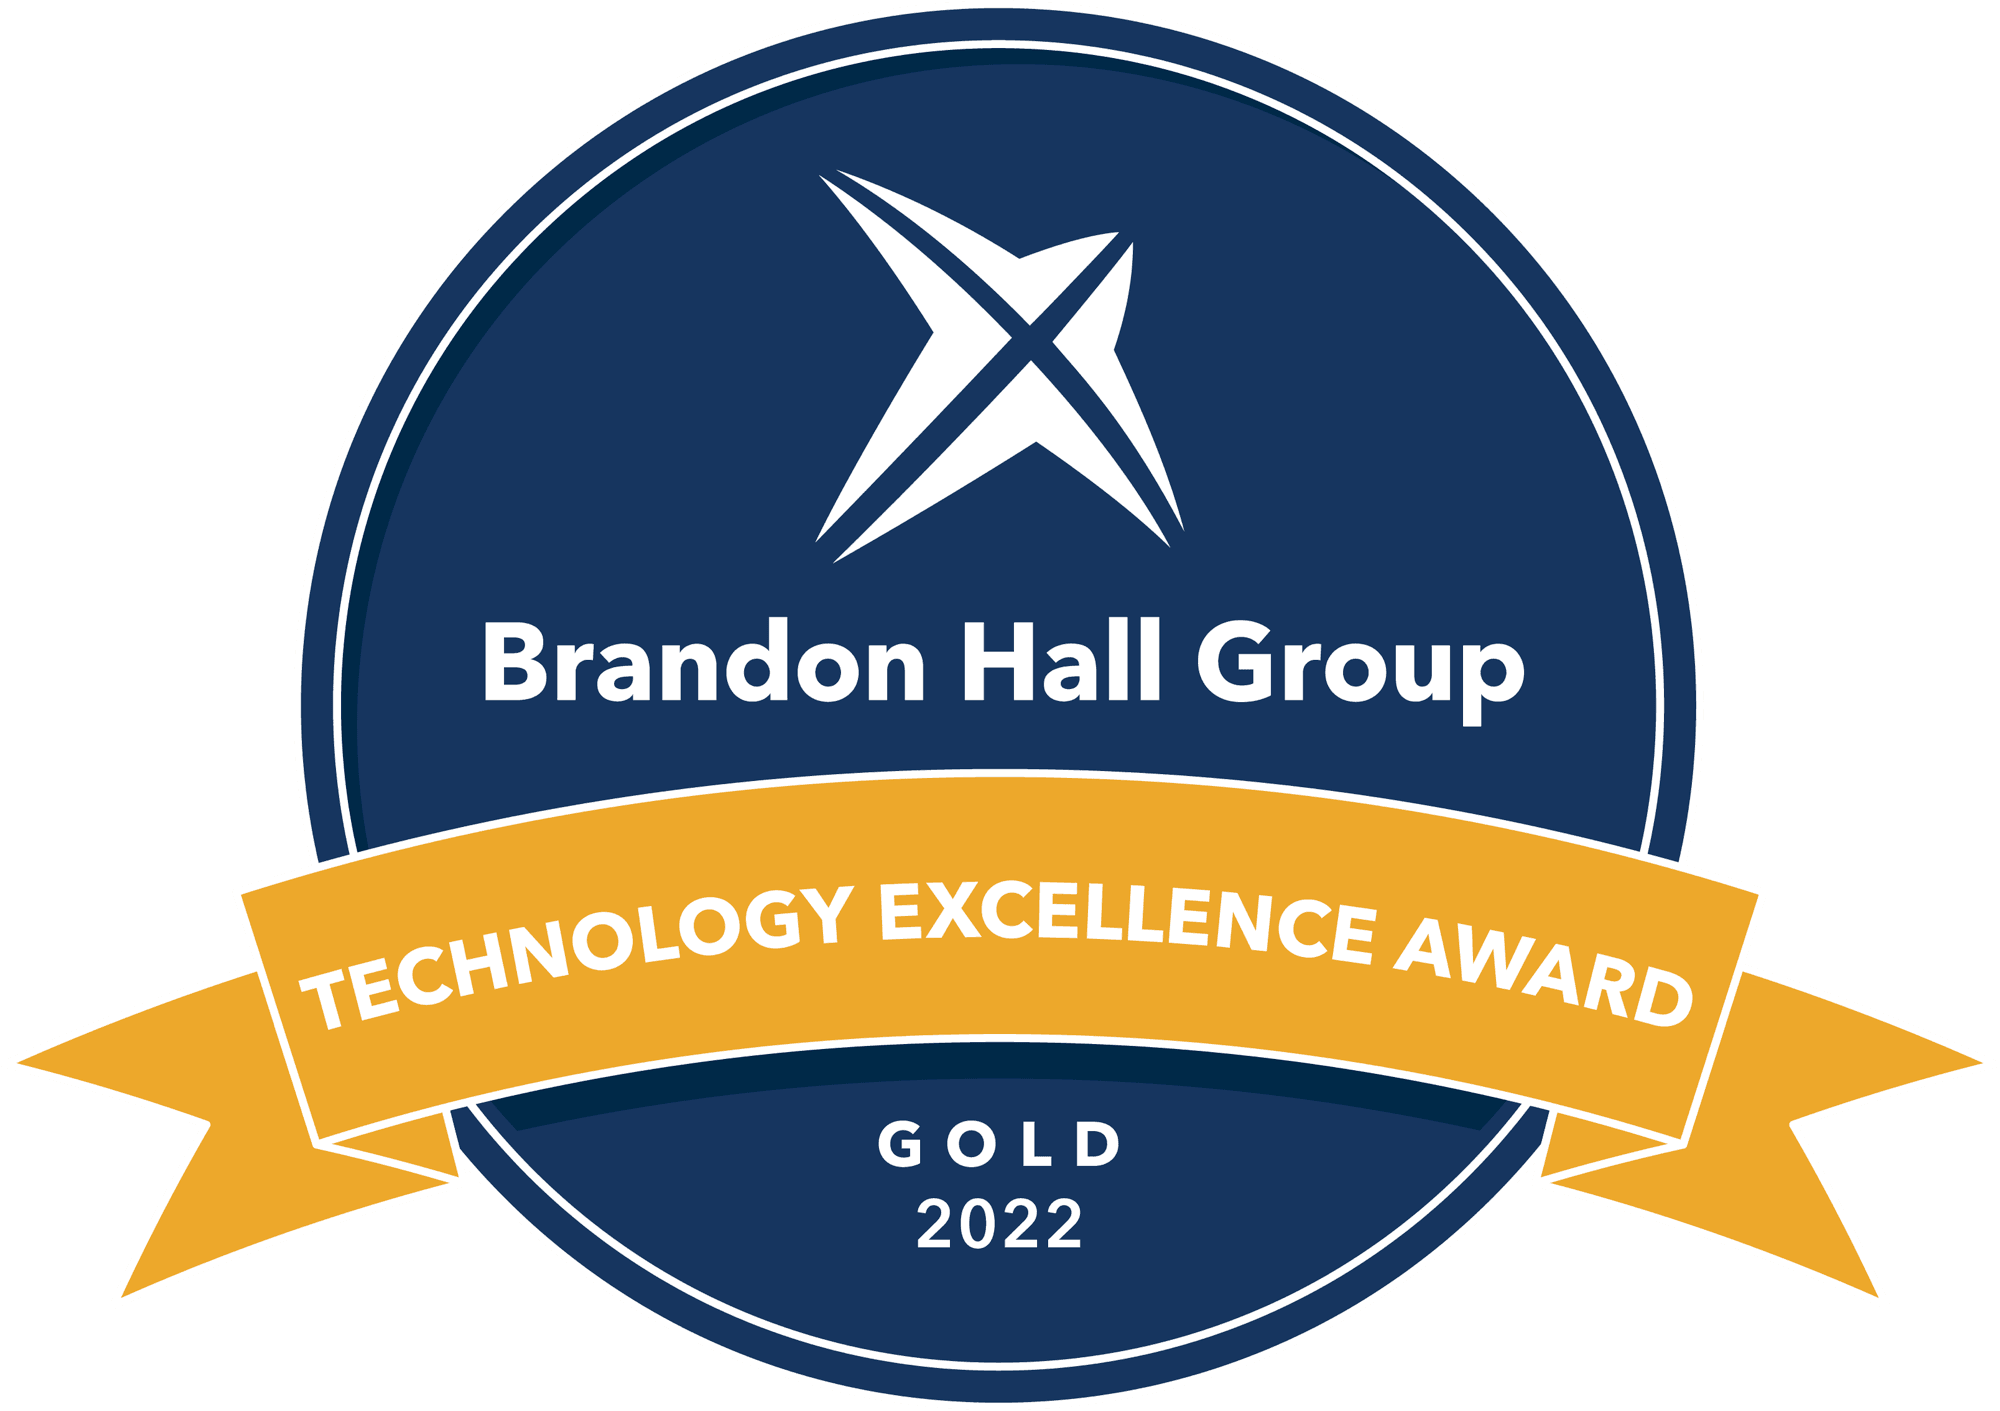 Brandon Hall Group, Technical Excellence Award Gold 2022 for Tesseract Learning